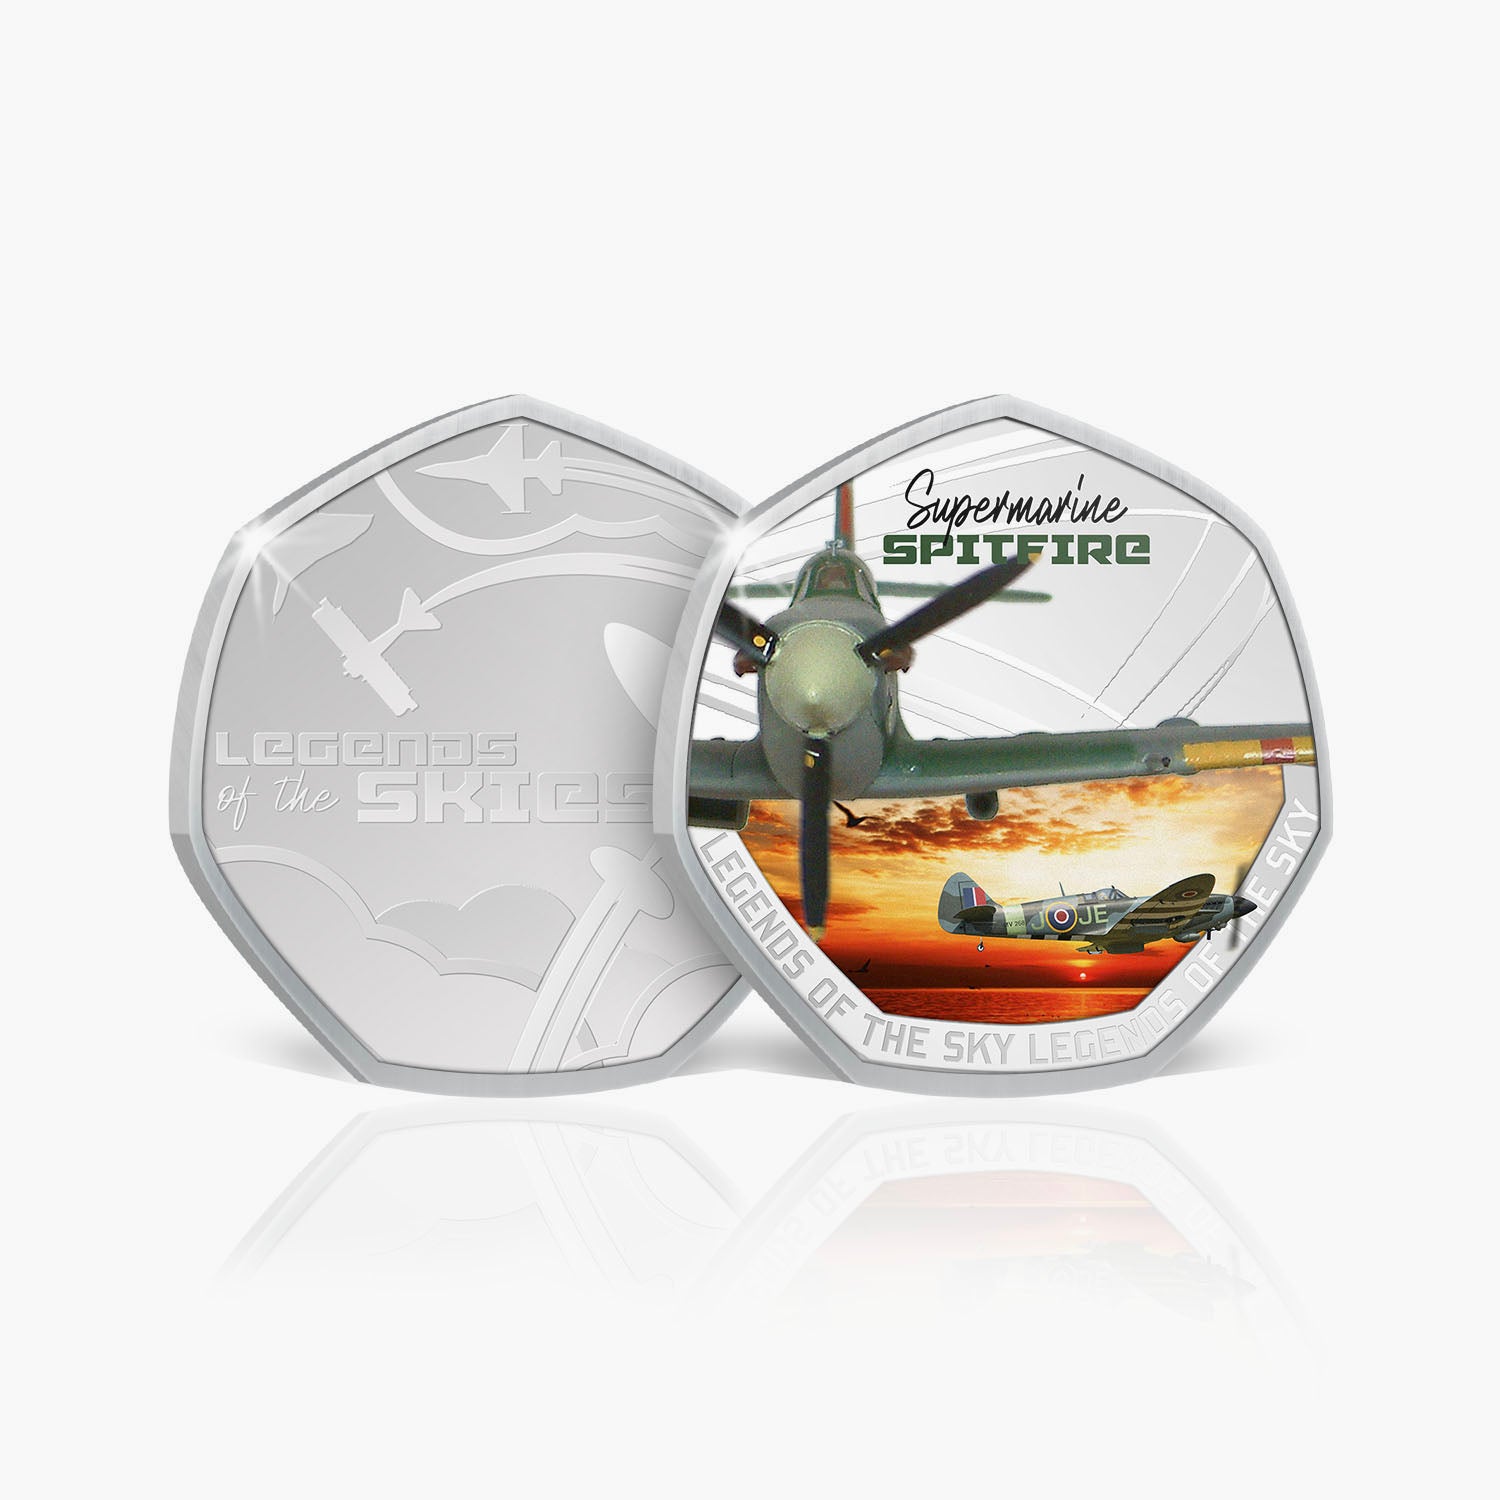 Legends Of The Skies Spitfire Silver-Plated Commemorative